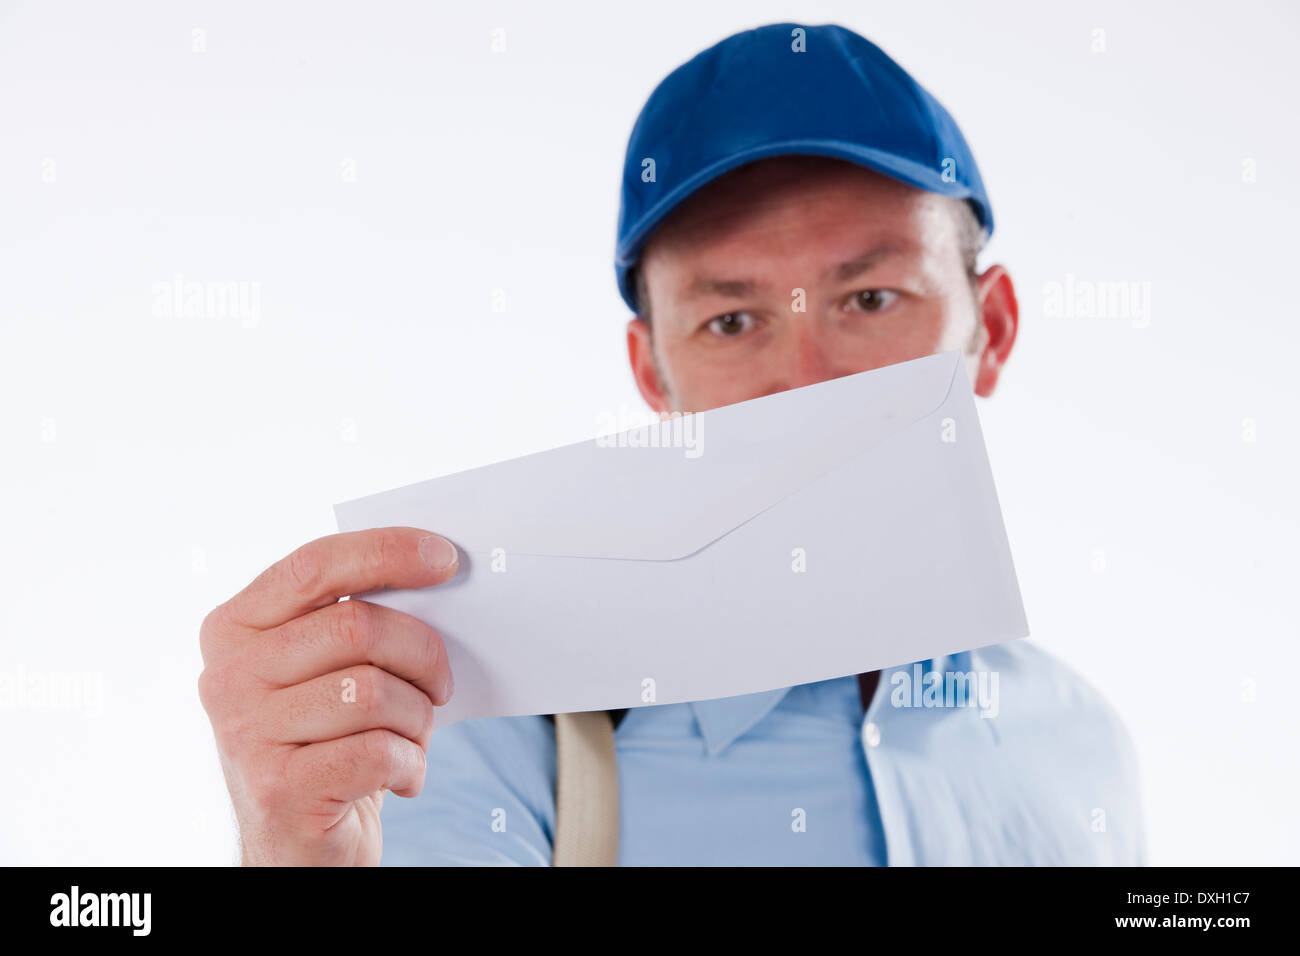 Mailman delivering mail Stock Photo